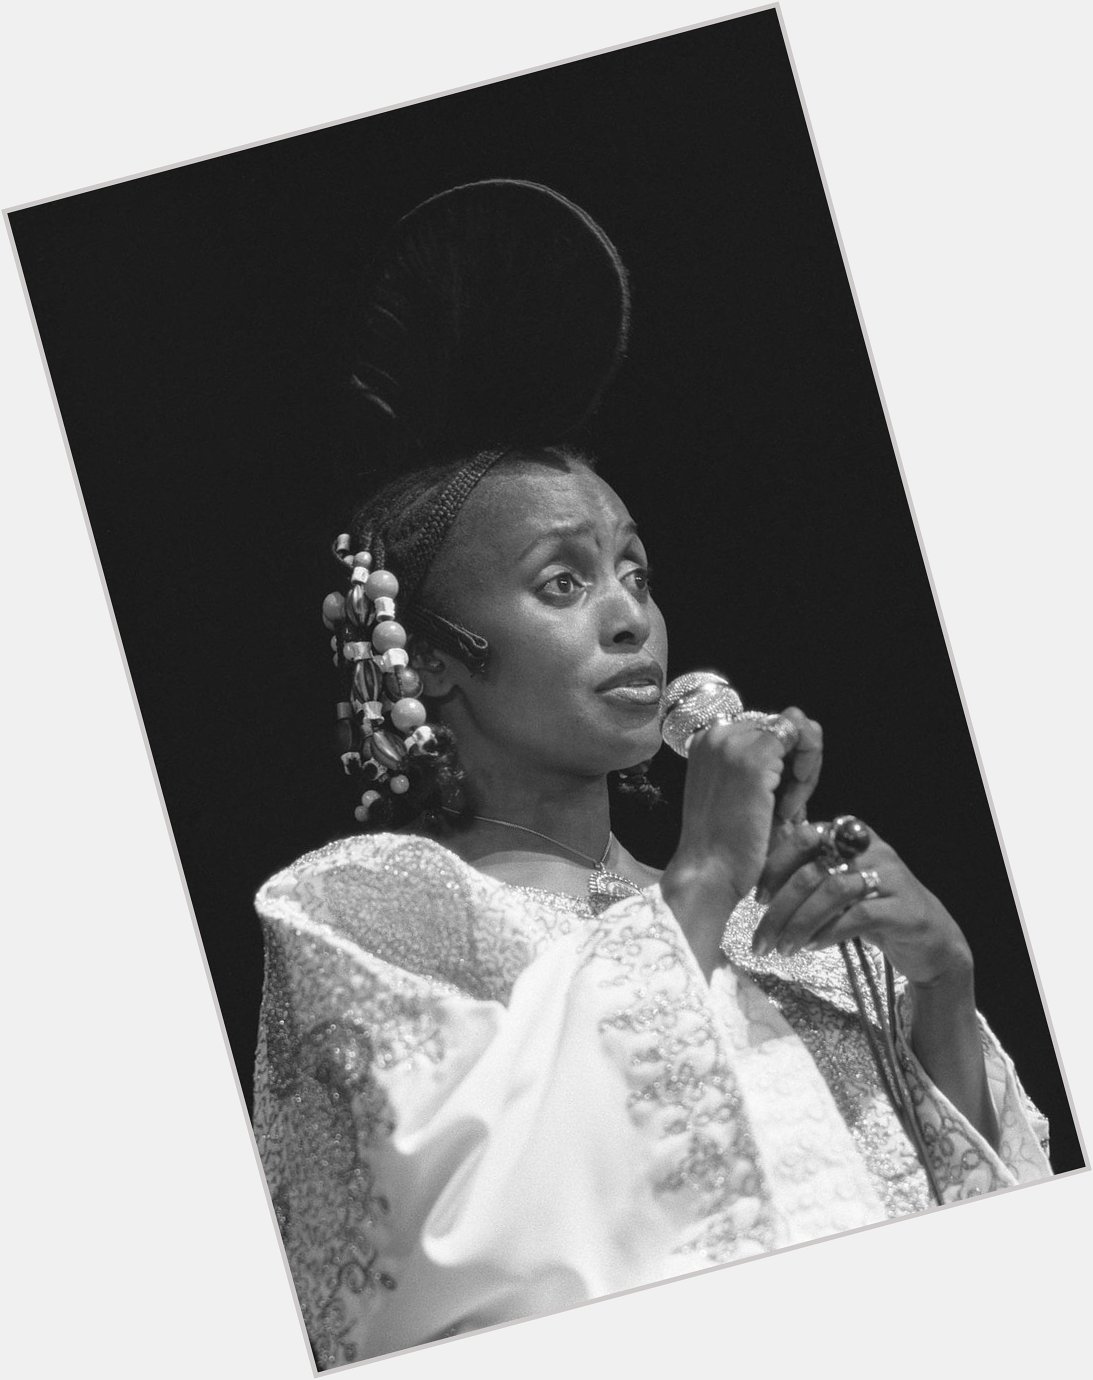 Happy birthday to South African singer and civil rights activist Miriam Makeba. RIP
Watch >  